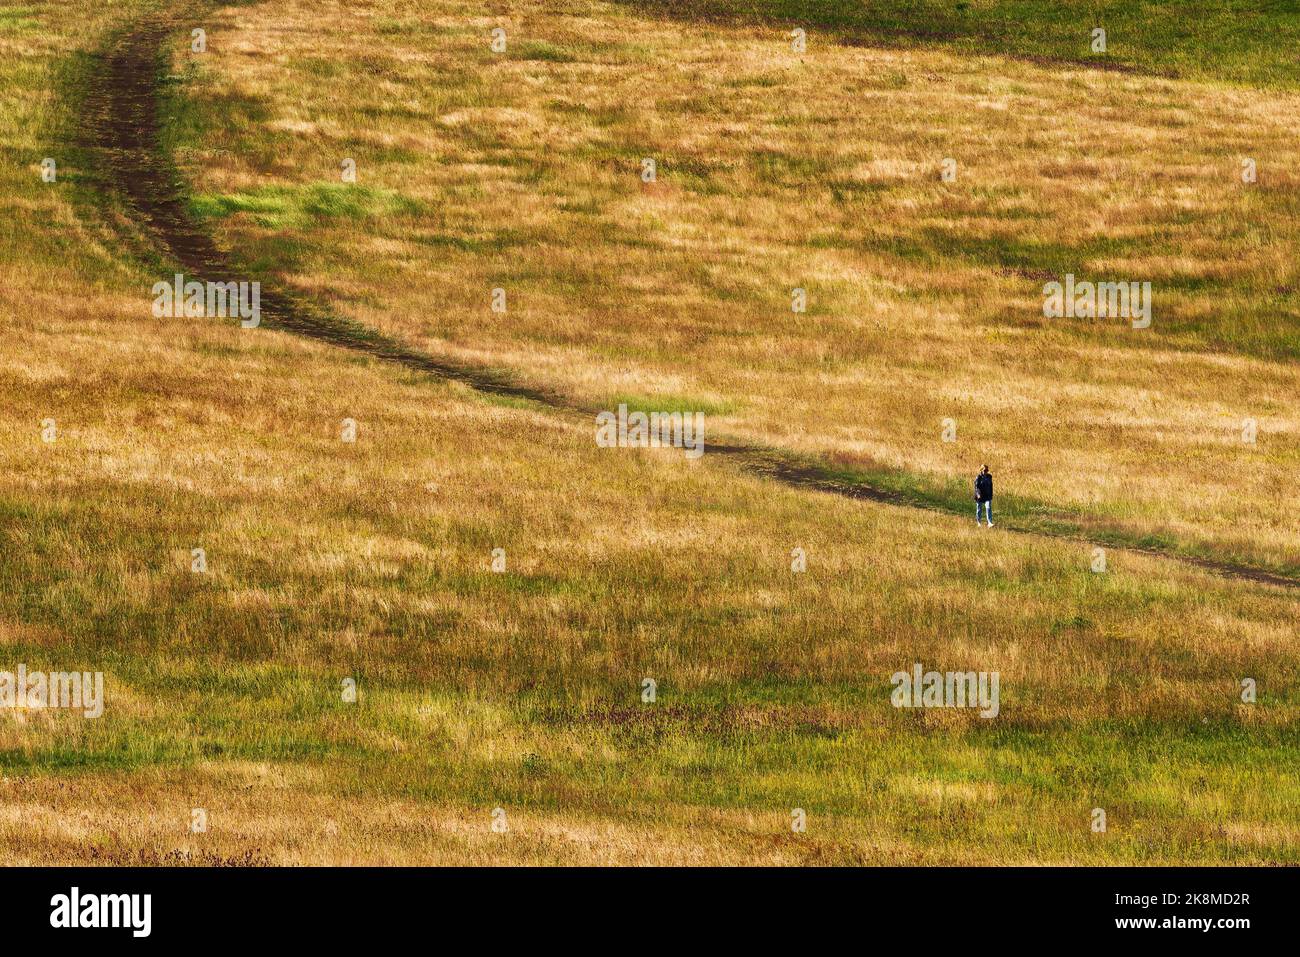 Zlatibor hiking outdoor activity, unrecognizable casual woman walking through grass hill landscape on sunny summer day at this Serbian tourist resort Stock Photo